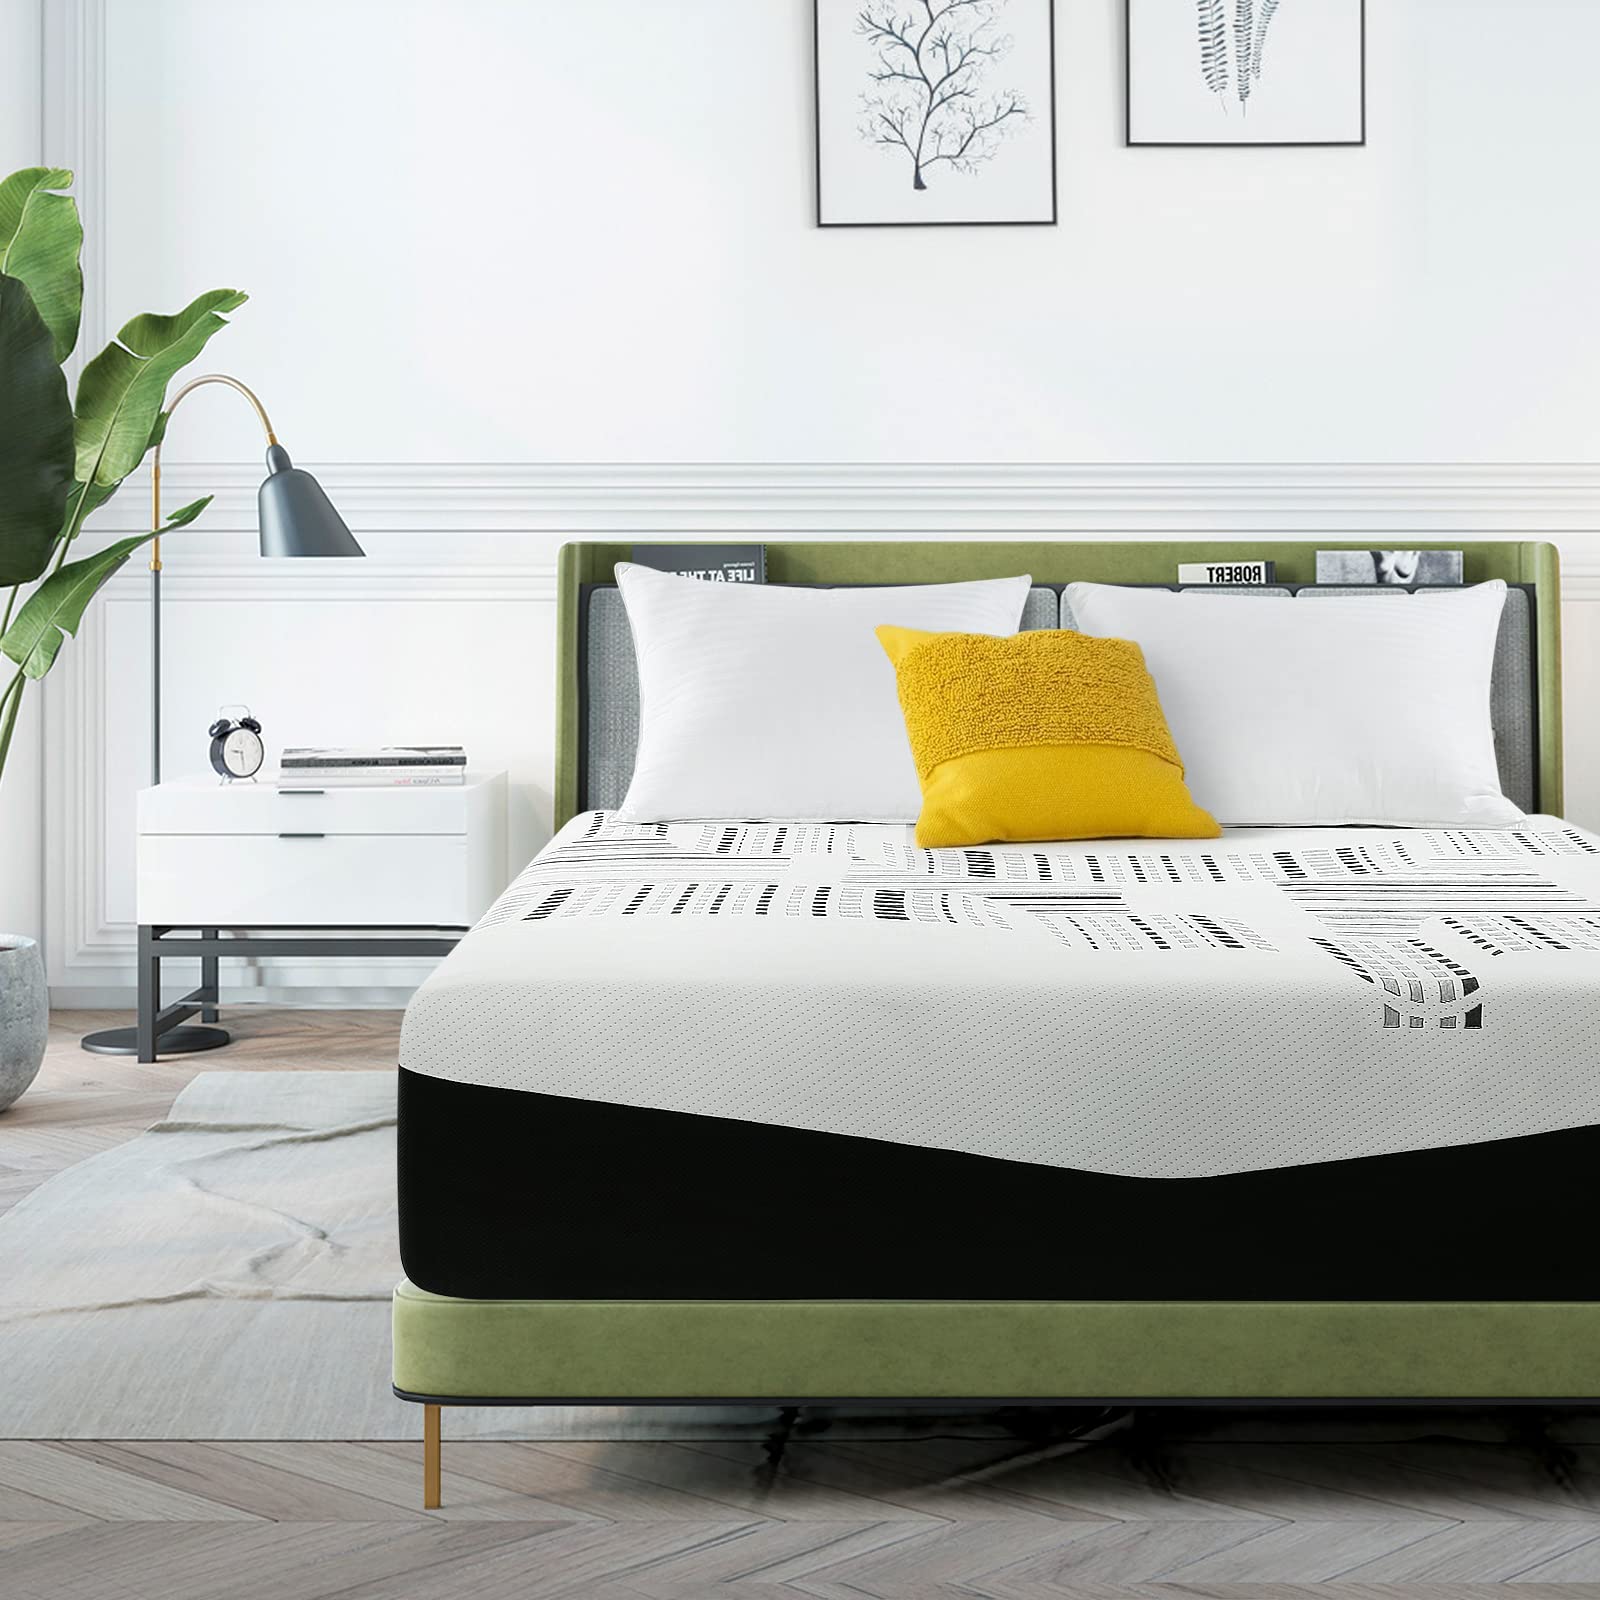 EMONIA Queen Mattress - 12 inch Thick Memory Foam Bed Mattresses with Mattress Cover, Removable and Soft 60x80x12 inch